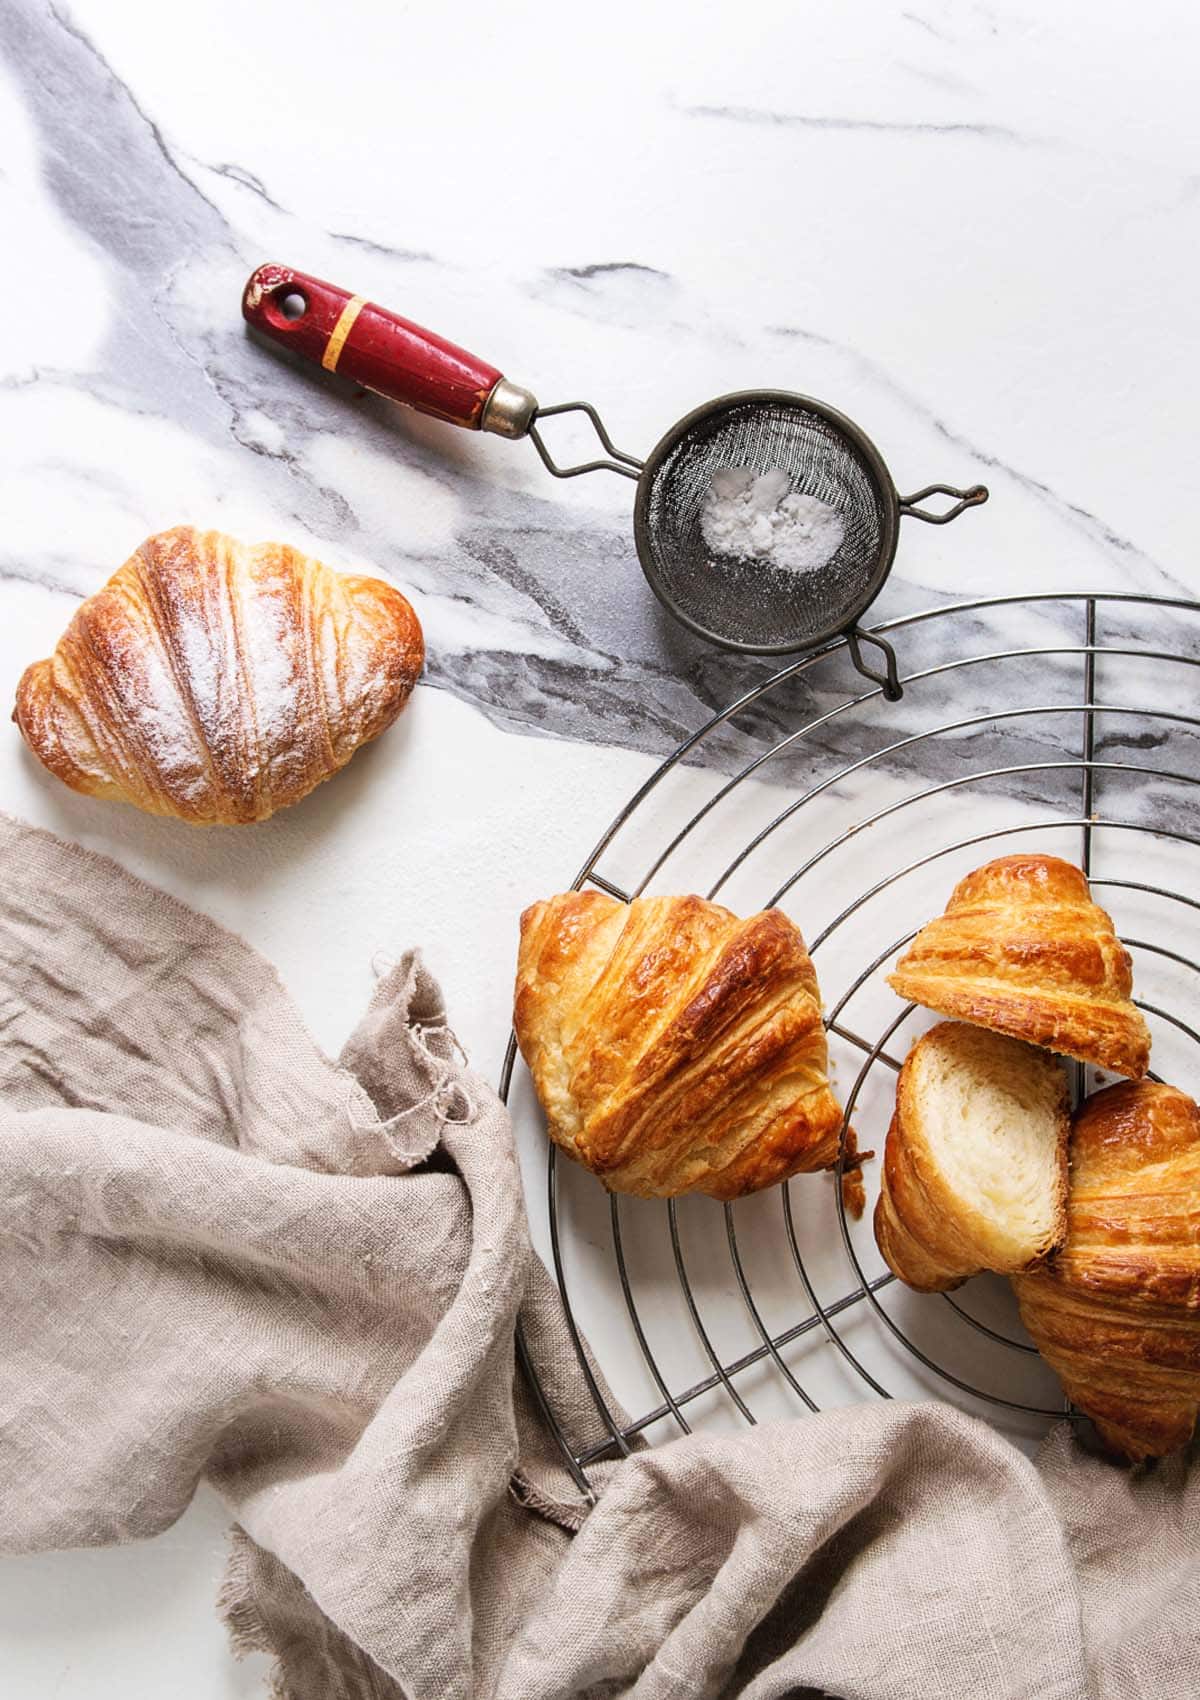 Croissants and crescent rolls can be used as a base for sandwiches or other dishes. The specific choice will depend on the desired texture and flavor, as well as the particular fillings and ingredients used.